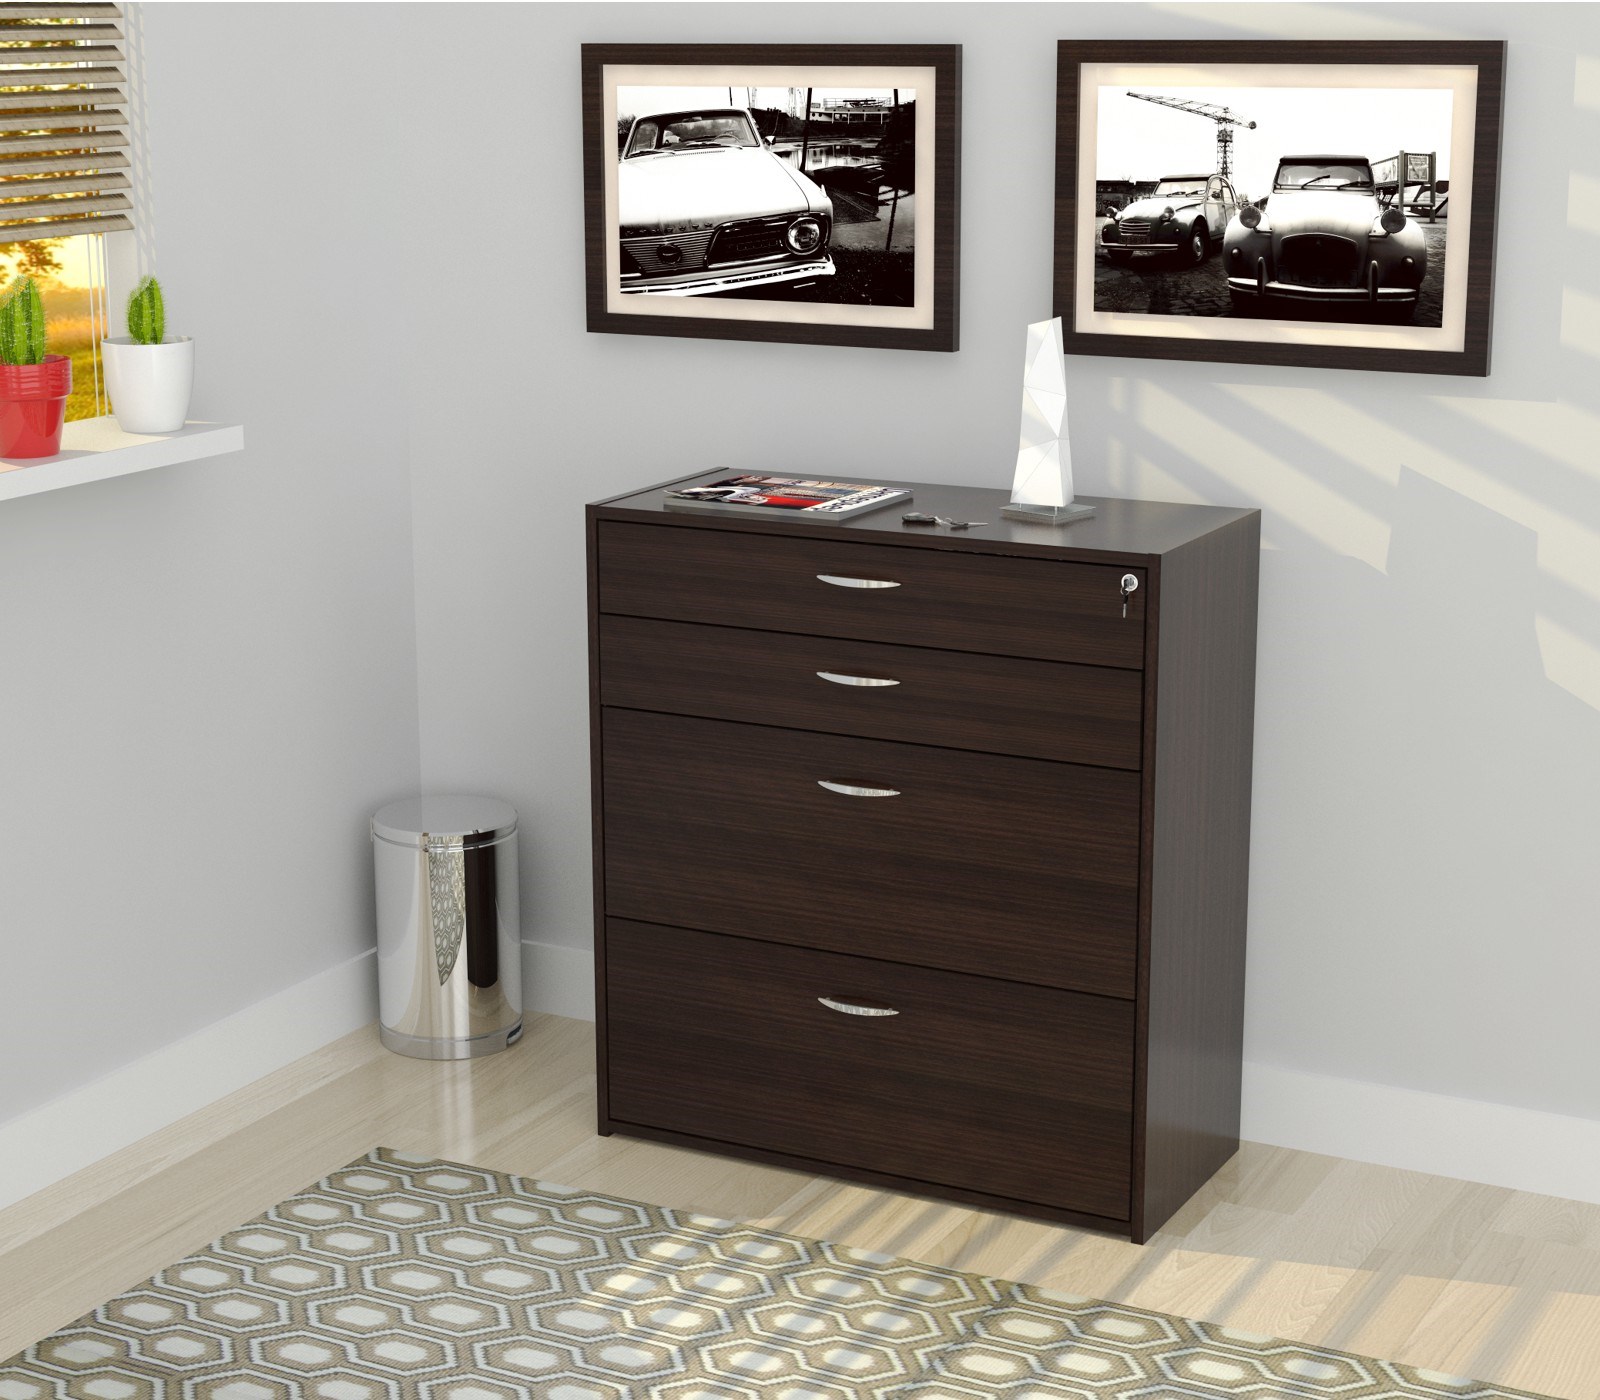 38.7" Espresso Melamine and Engineered Wood Filing Cabinet with 4 Drawers